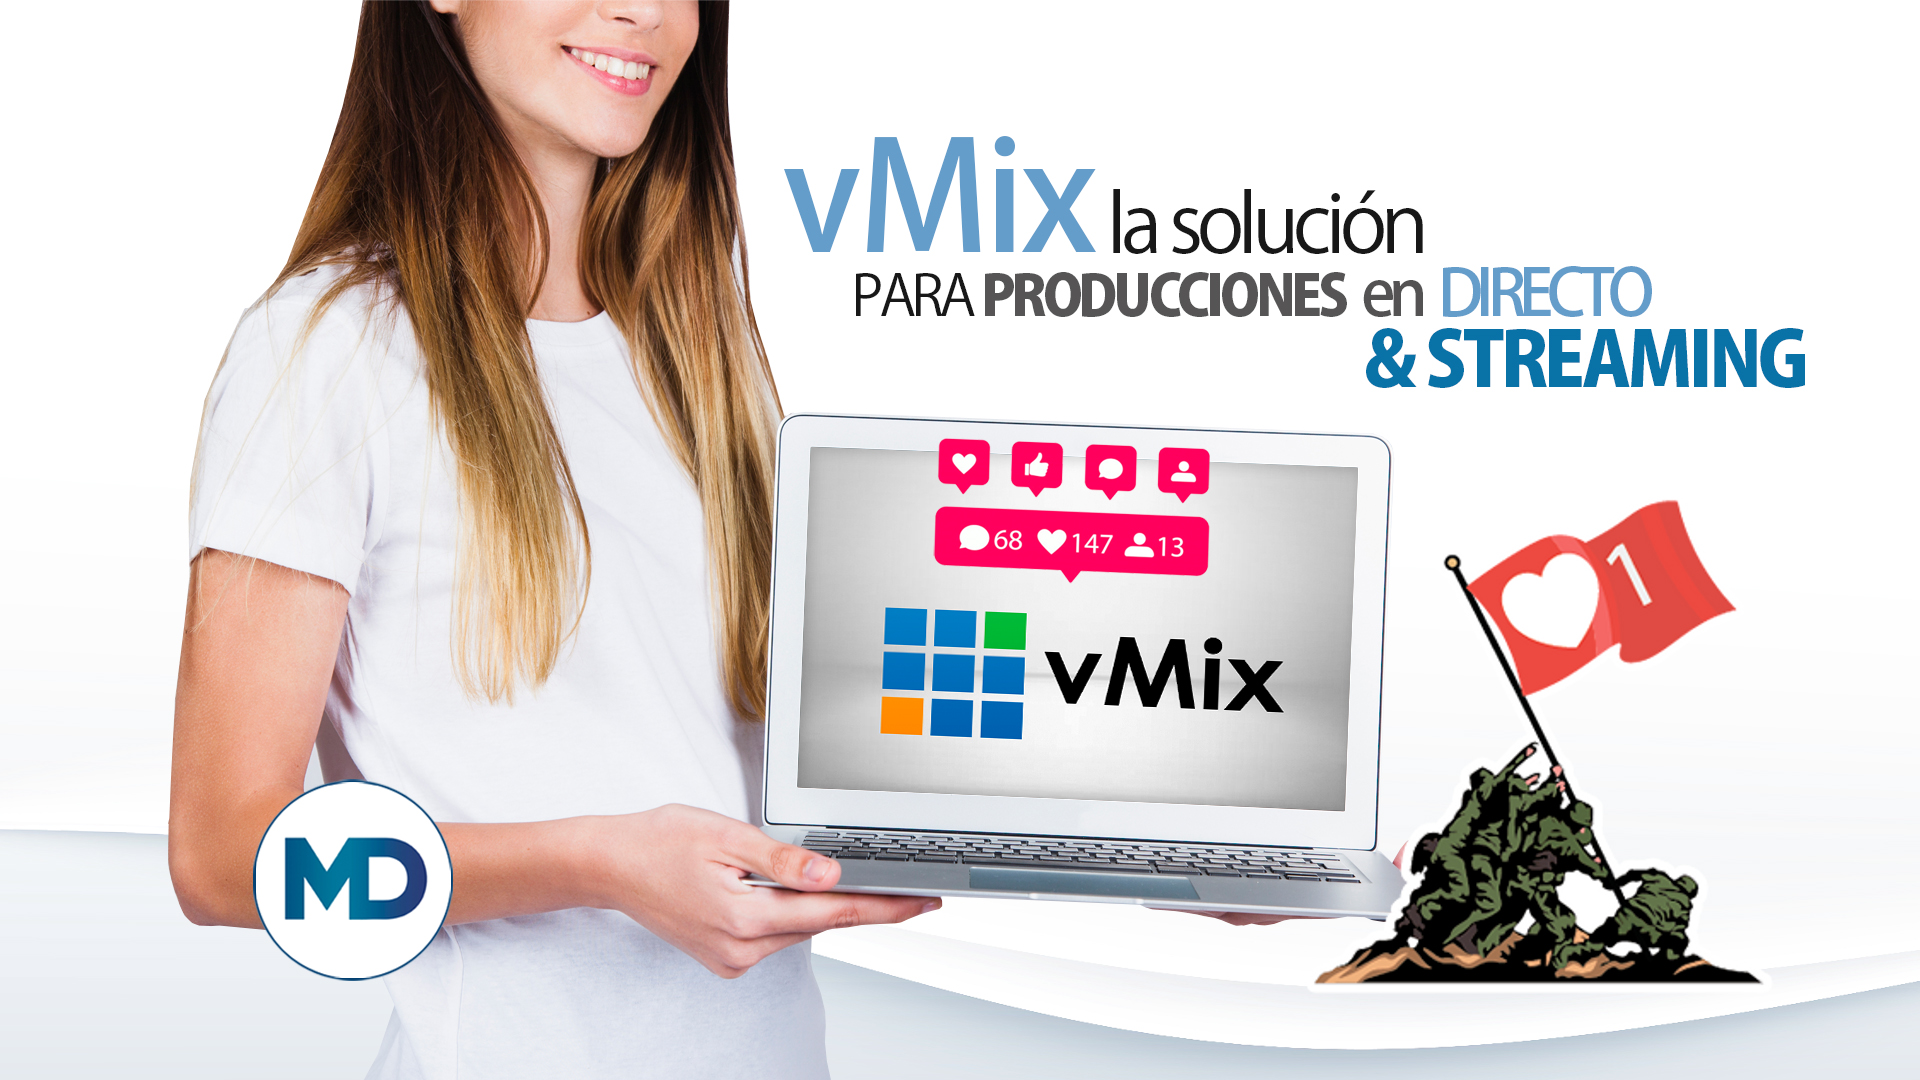 vMix, the solution for live productions and streaming